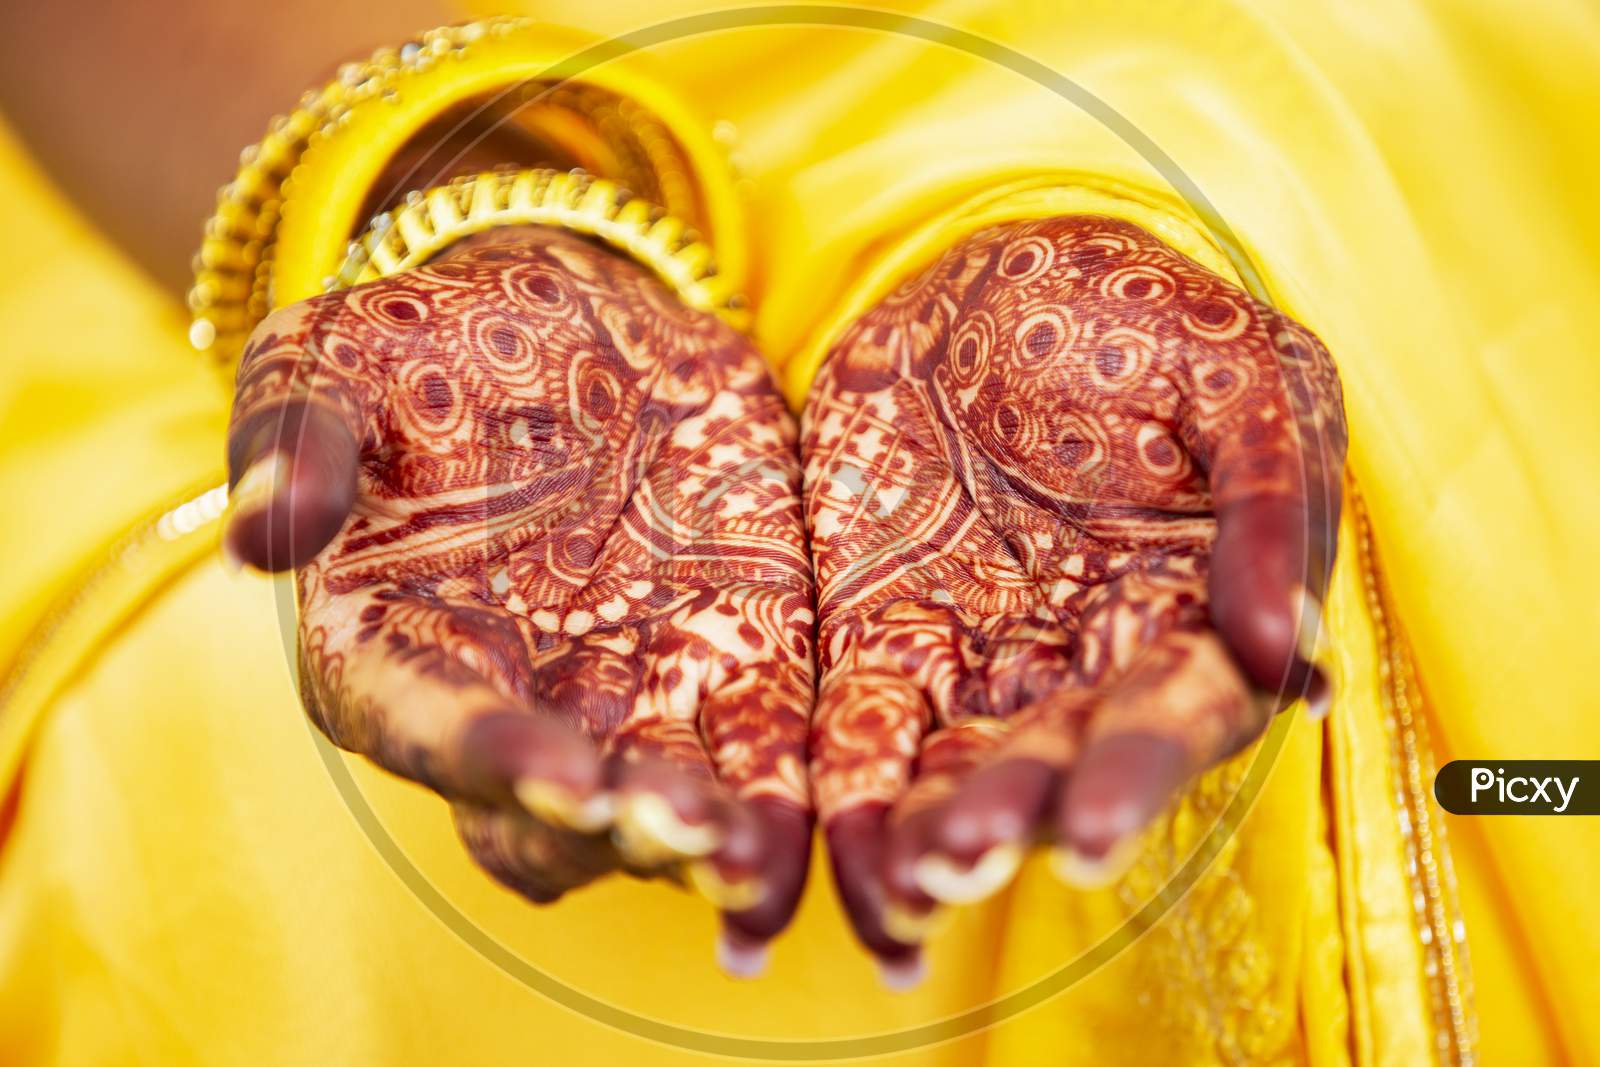 Hindu bride's hand painted with henna